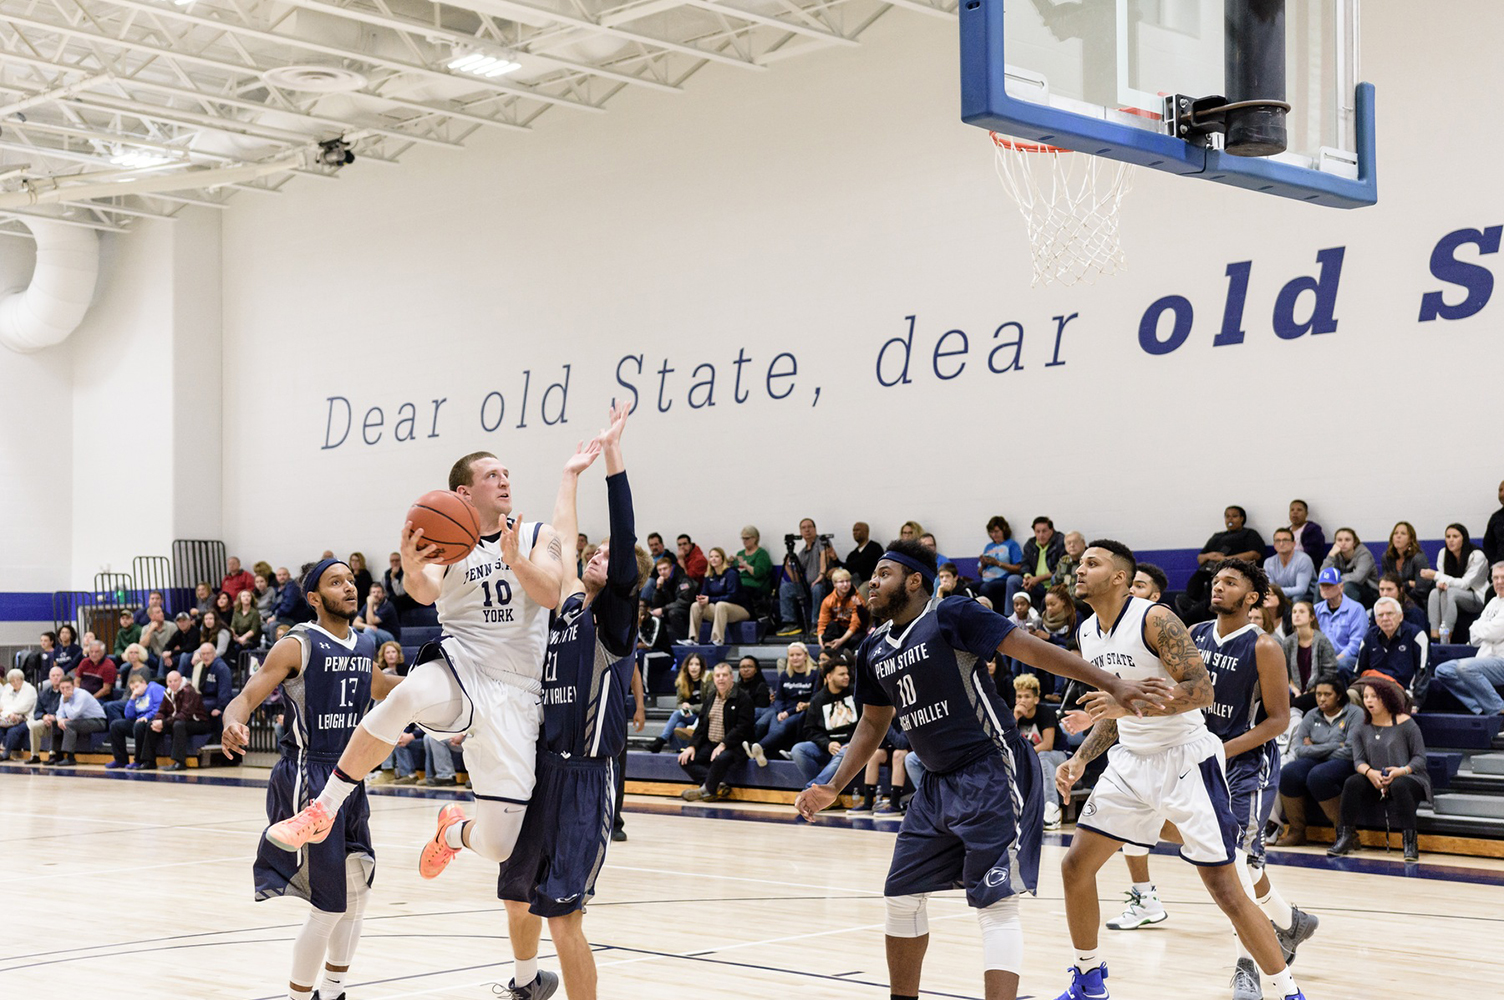 Trent Thomas goes up for an acrobatic layup in a game against Penn State Lehigh Valley earlier this season, which Penn State York won 77-70.